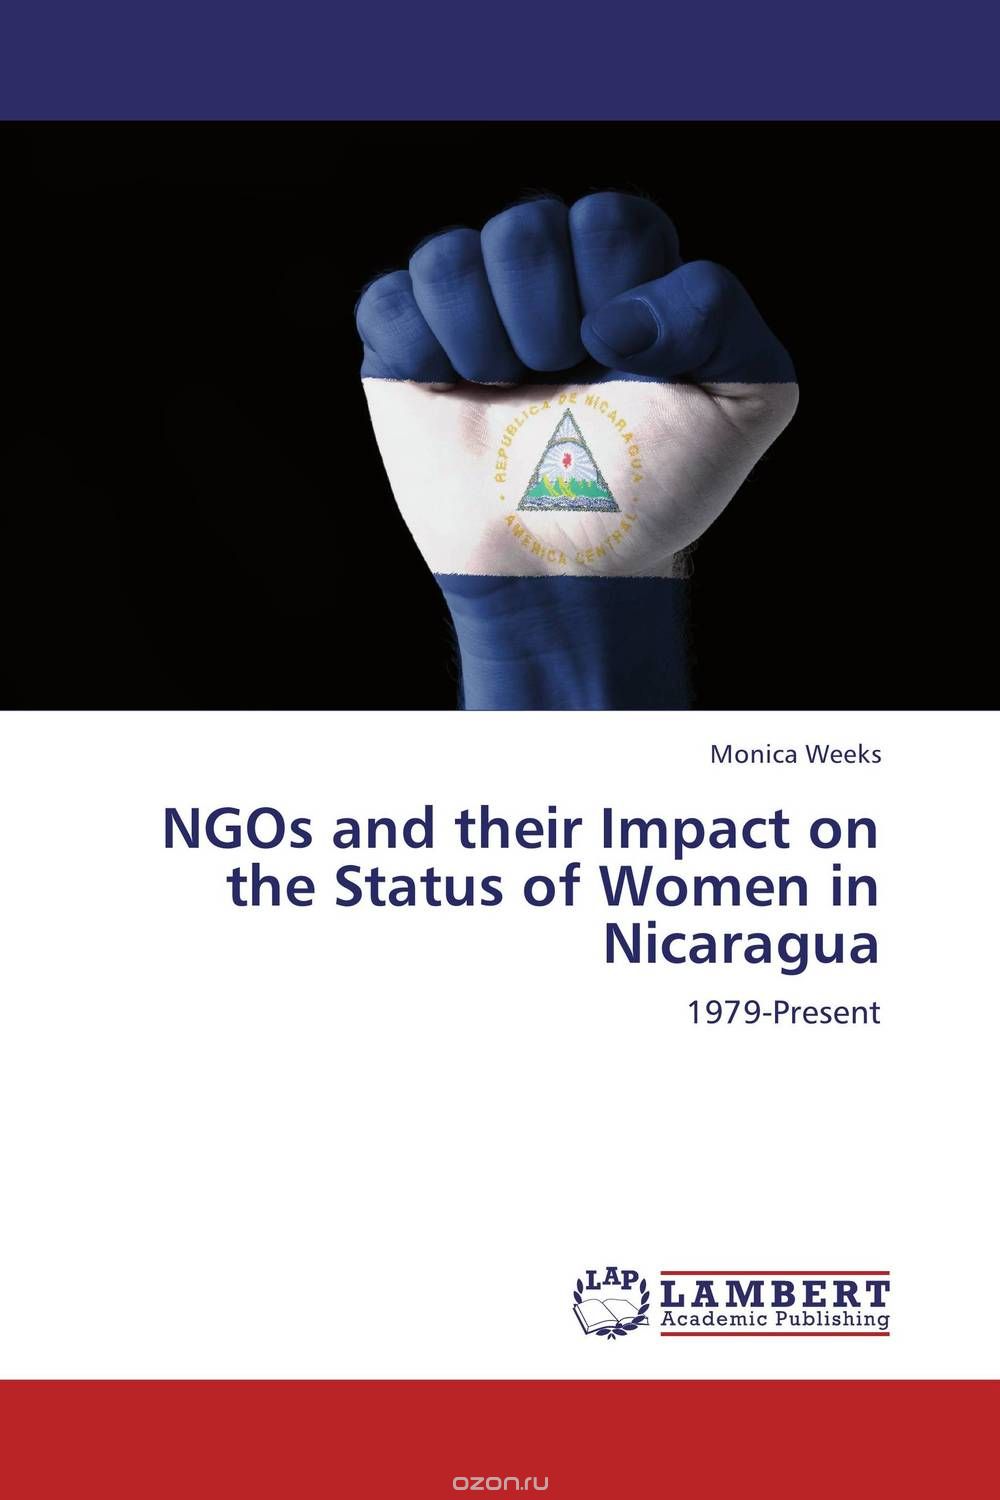 NGOs and their Impact on the Status of Women in Nicaragua